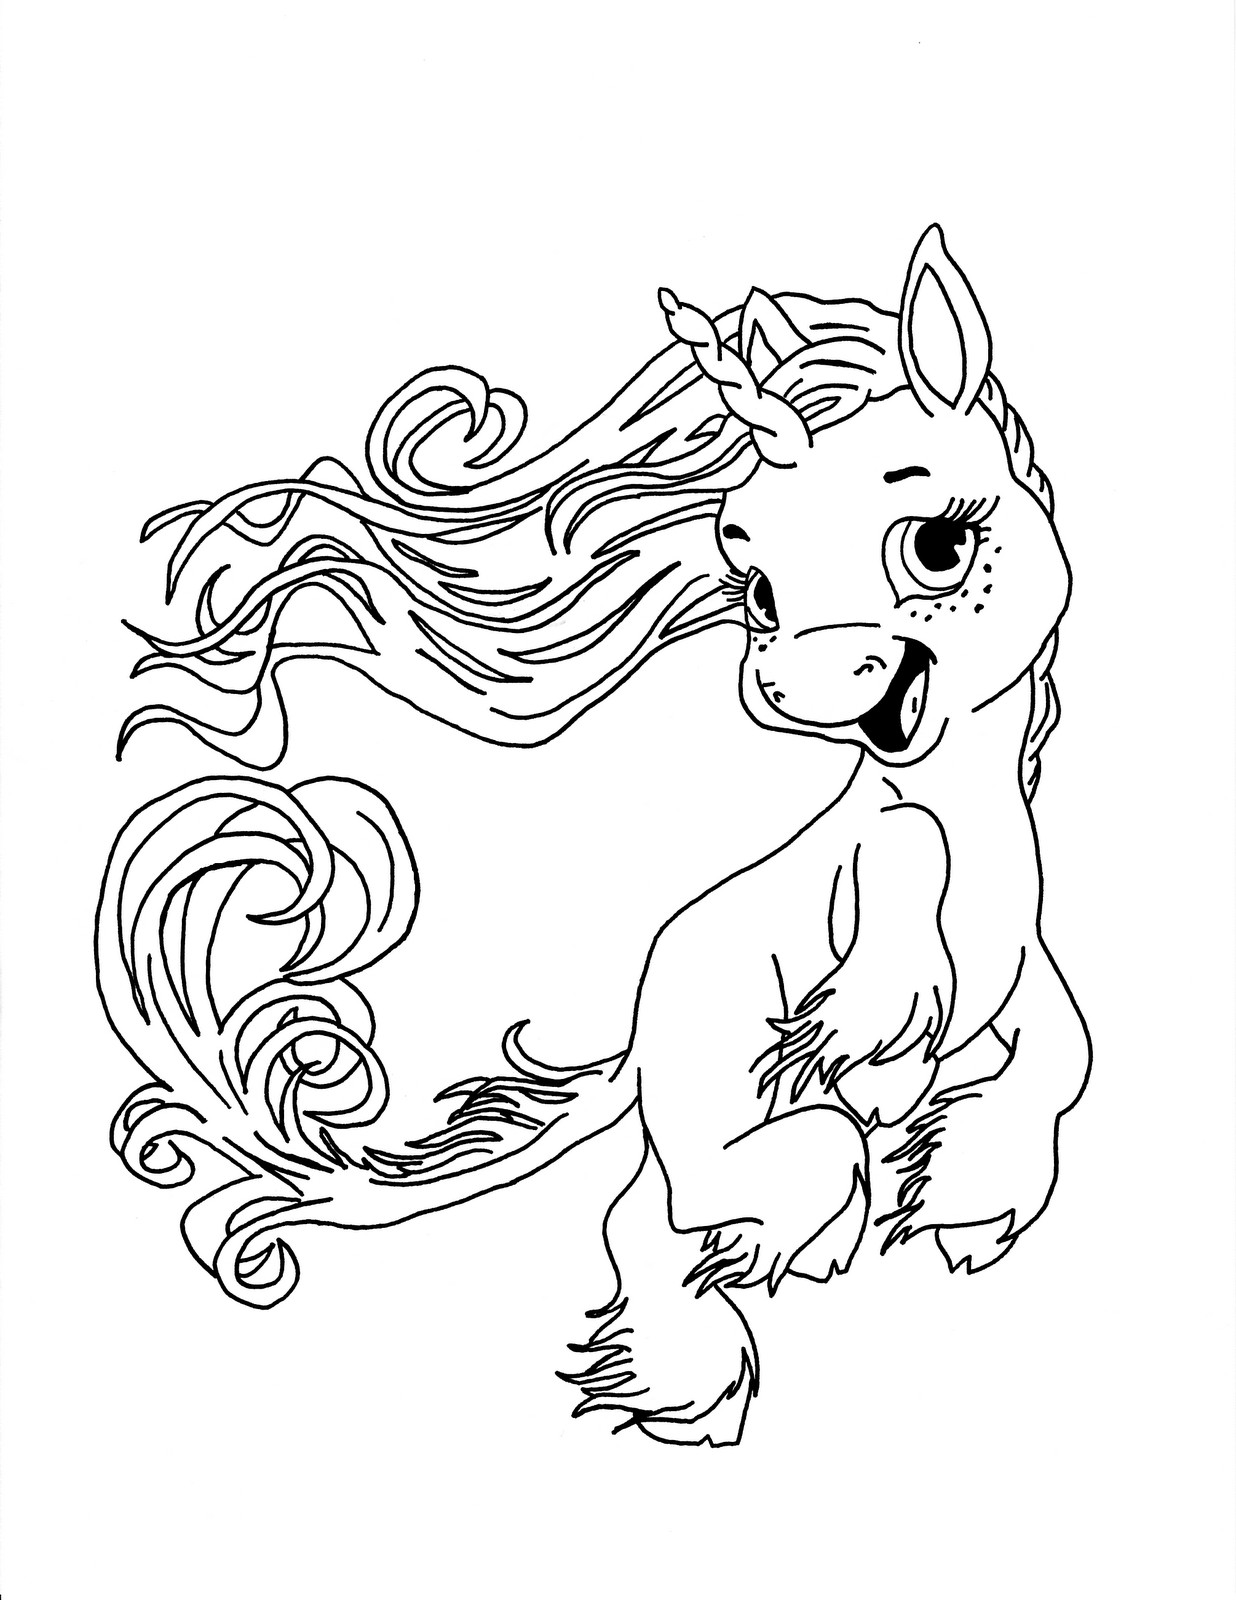 Coloring Pages : Magical Baby Unicorn Coloring Free Printable ...